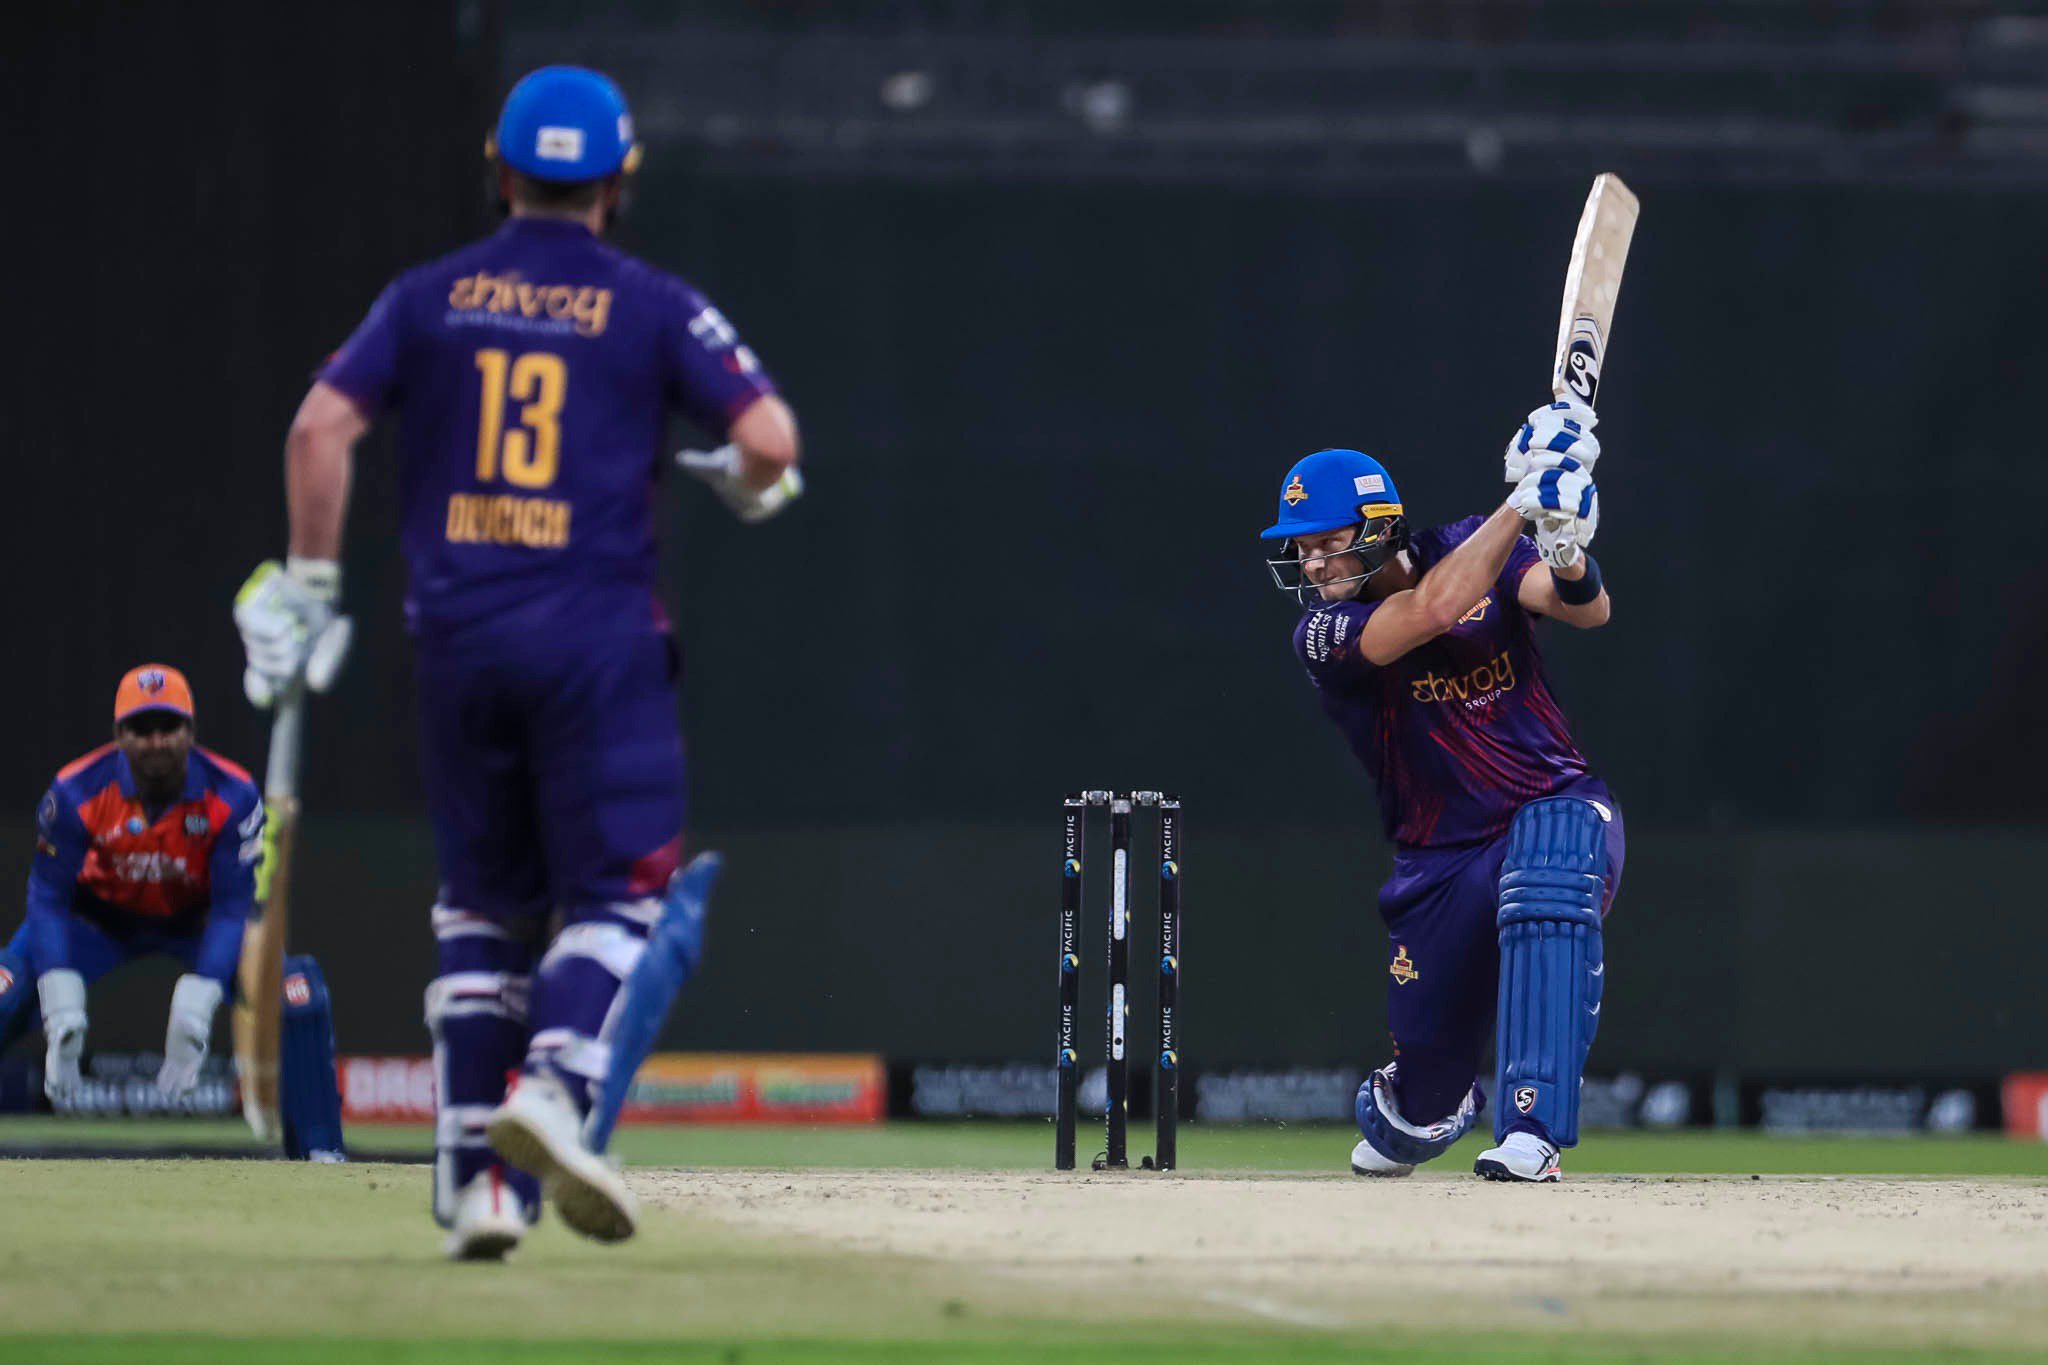 Abu Dhabi T10 League 2019 Live Streaming of Deccan Gladiators vs Team Abu Dhabi Online on Sony Liv How to Watch Free Live Telecast of DEG vs TAB on TV and Cricket